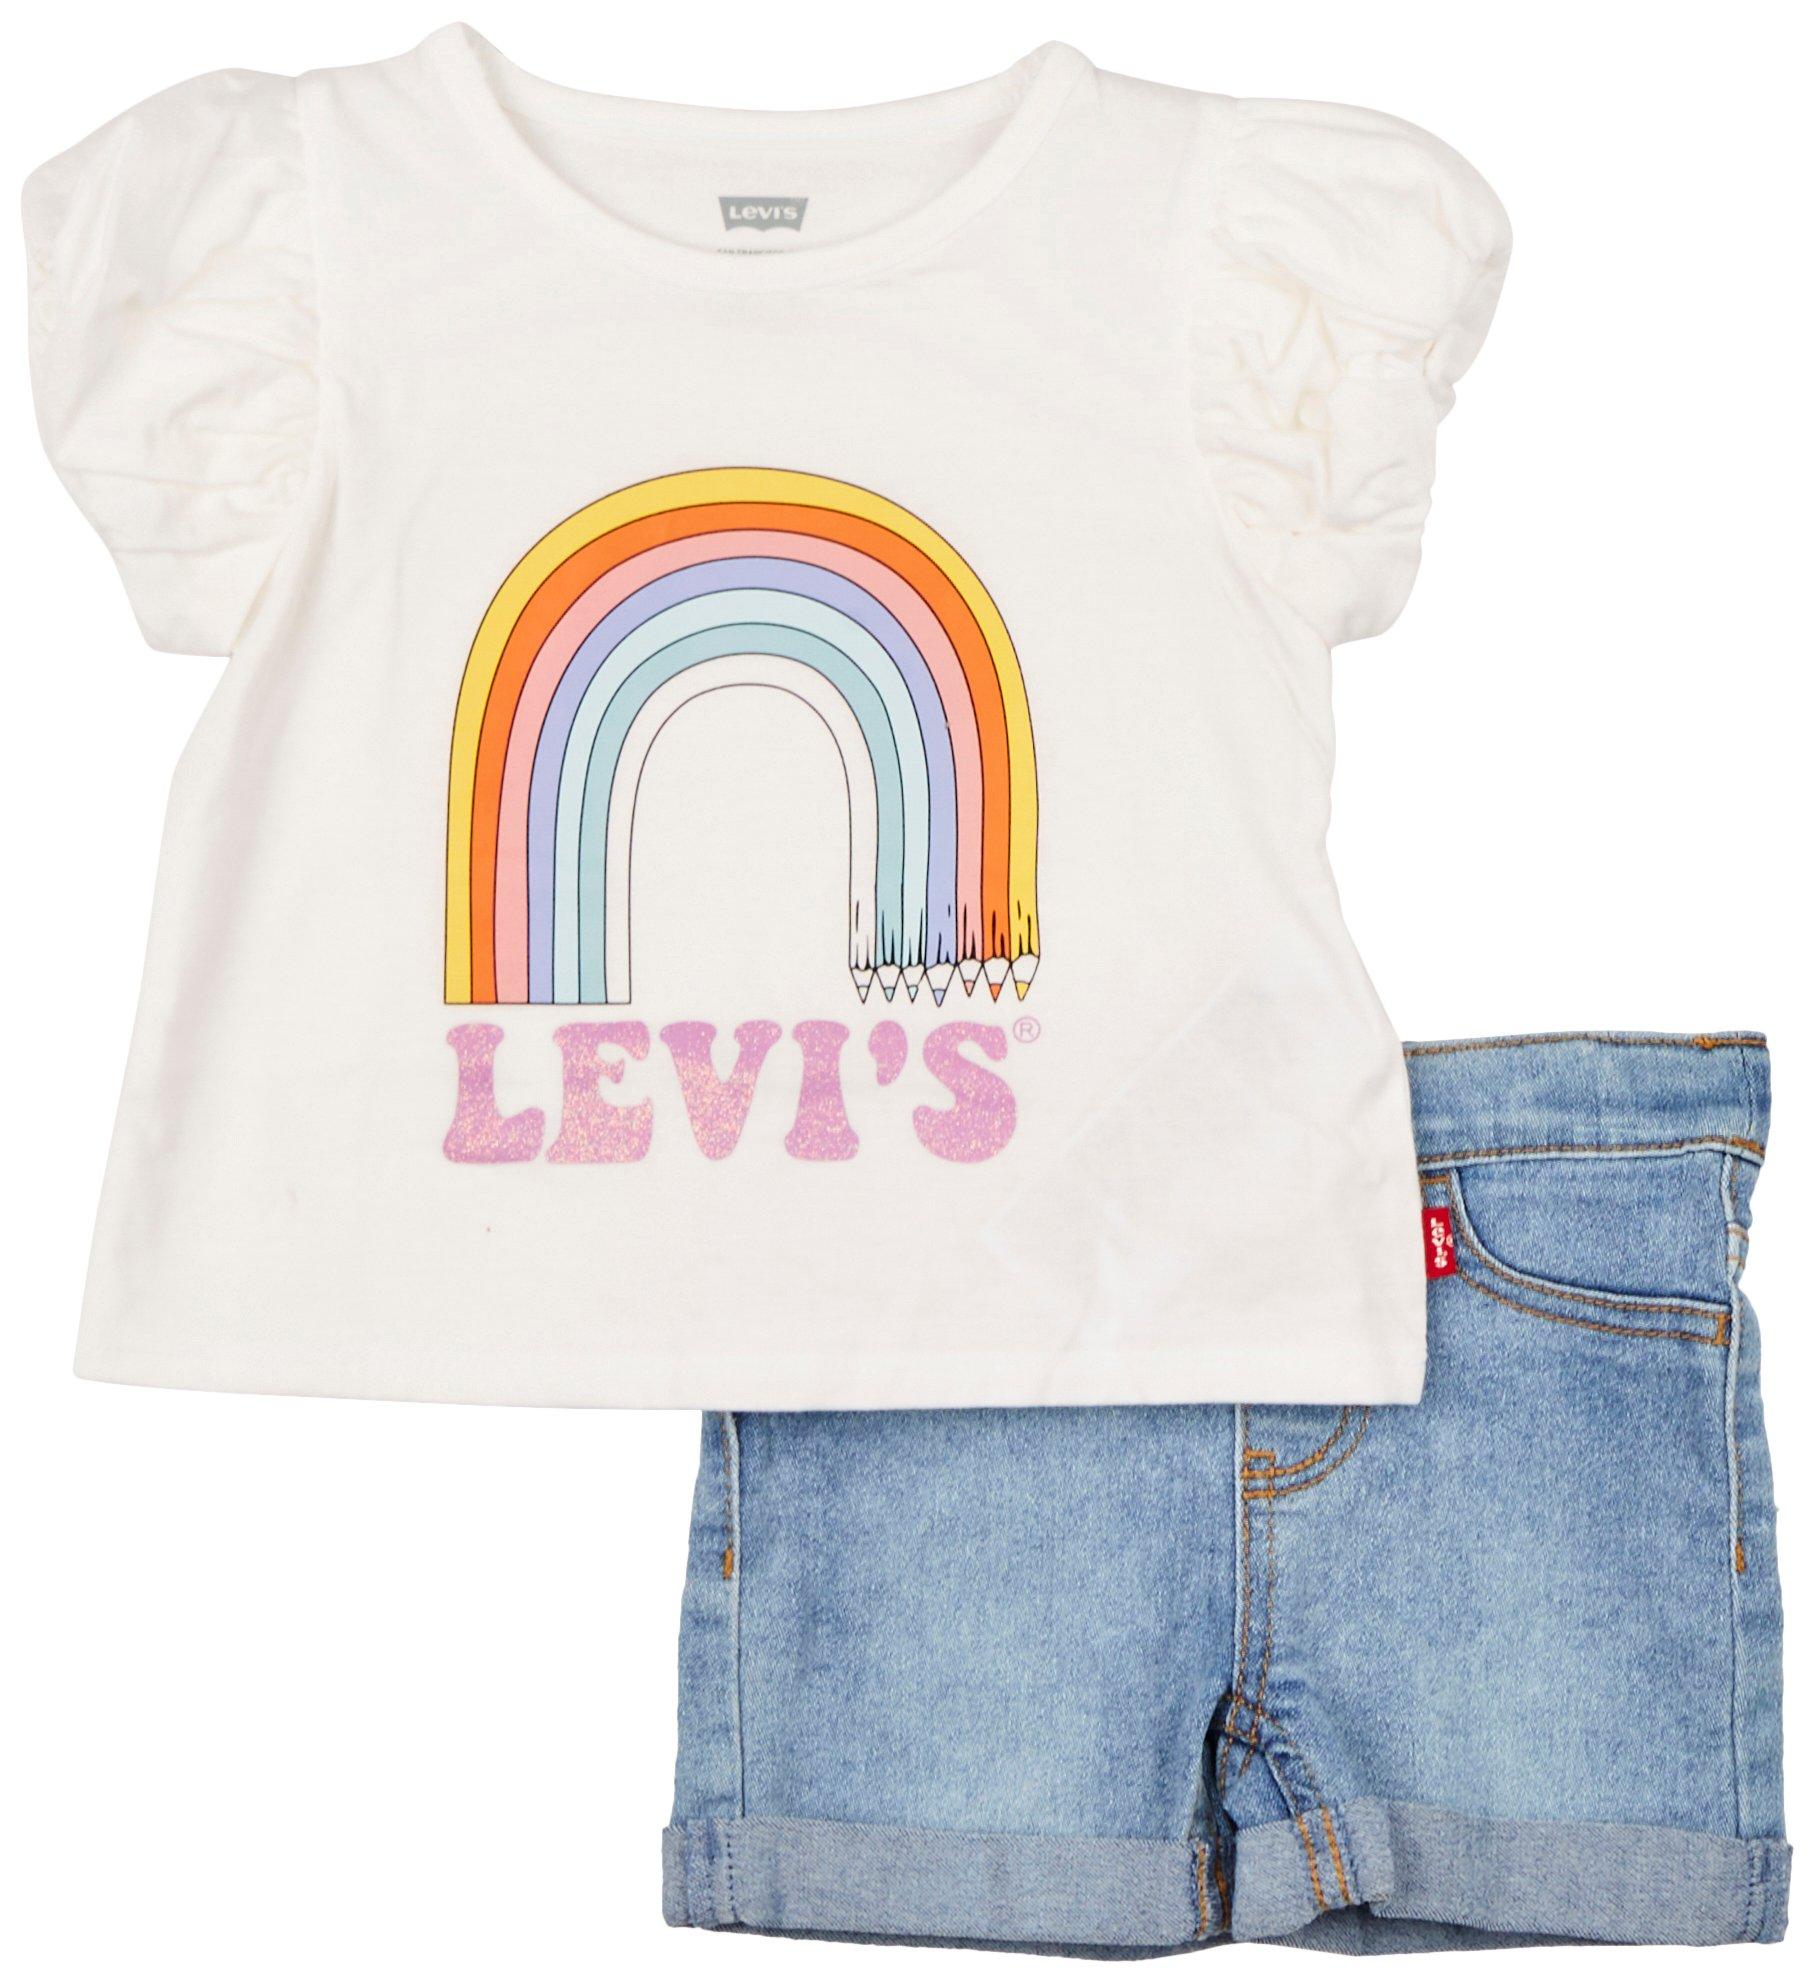 Toddler Girls 2 pc. Rainbow Top And Short Set